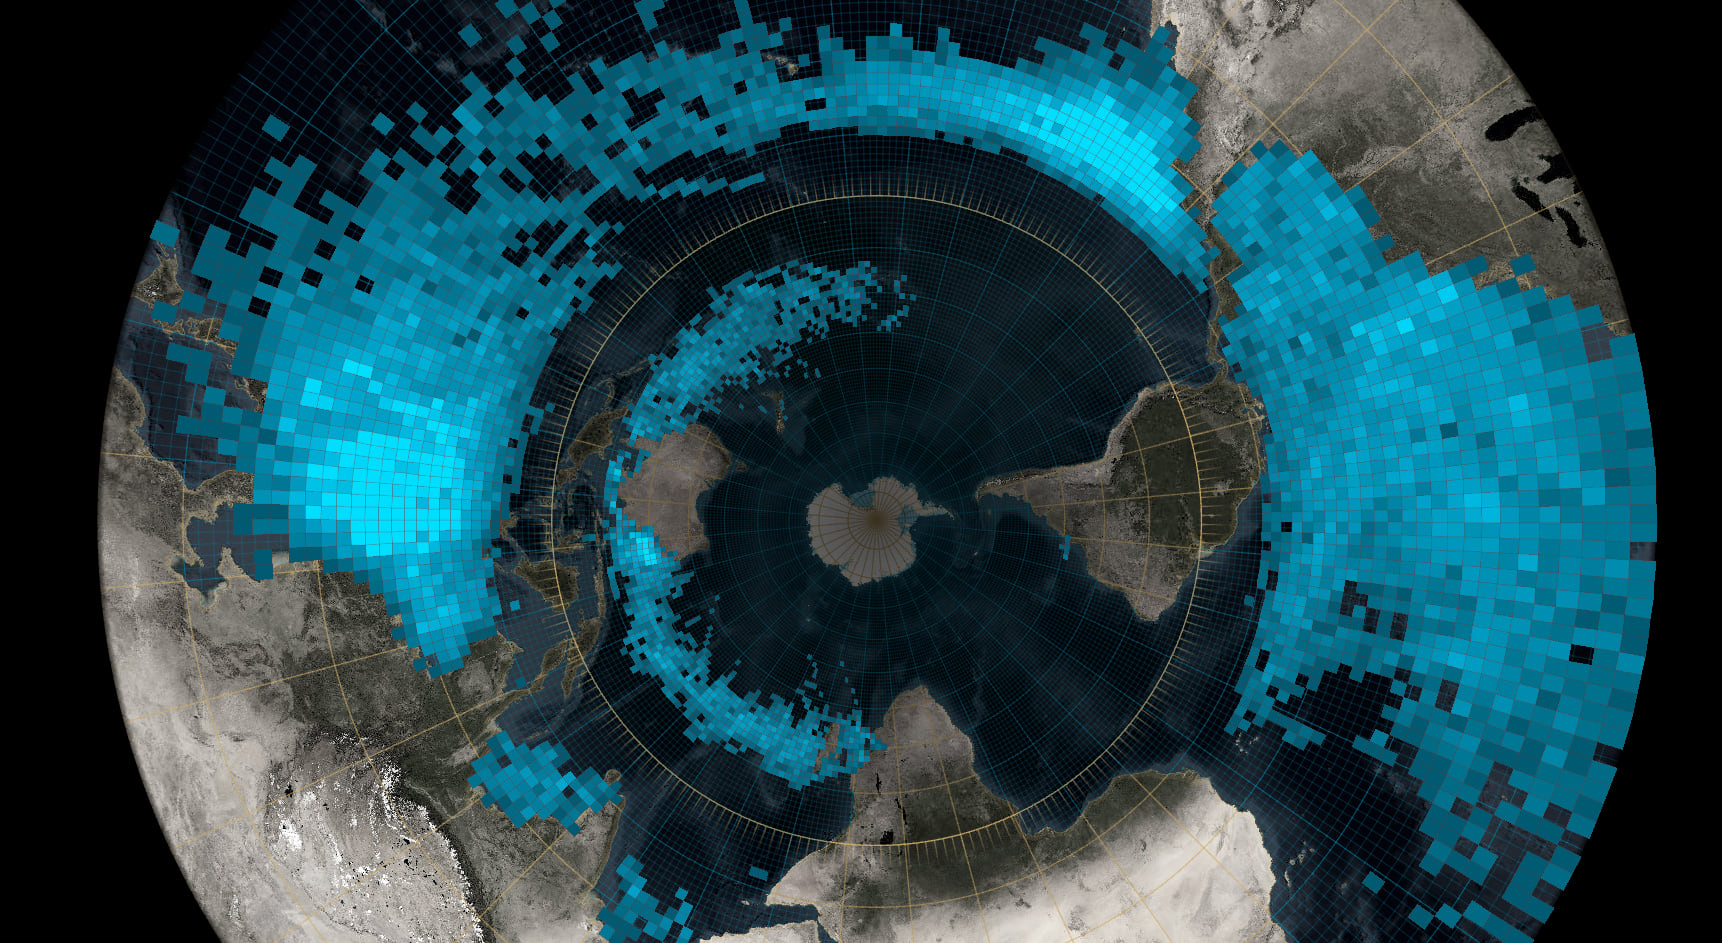 Hurricane locations binned in the South Pole Stereographic projection.